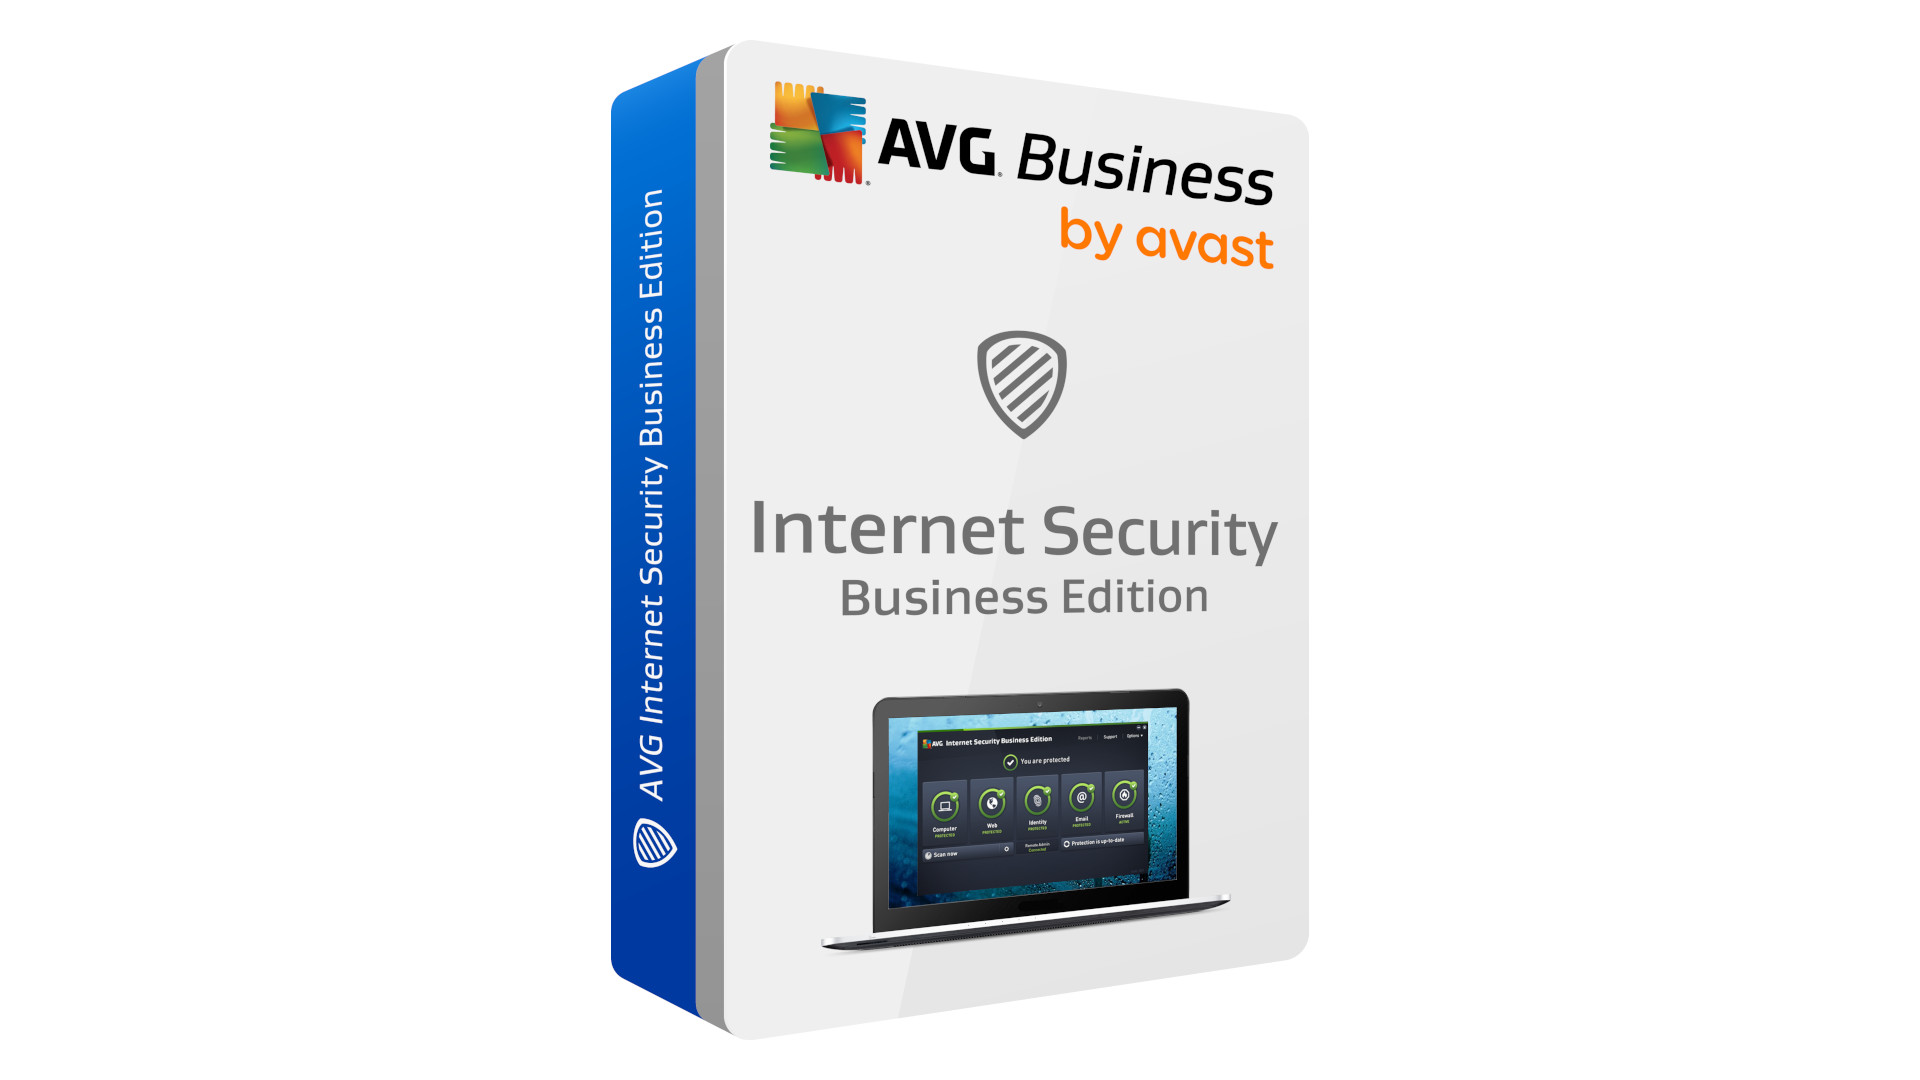 AVG Internet Security Business Edition 2022 Key (1 Year / 1 Device) 21.47$